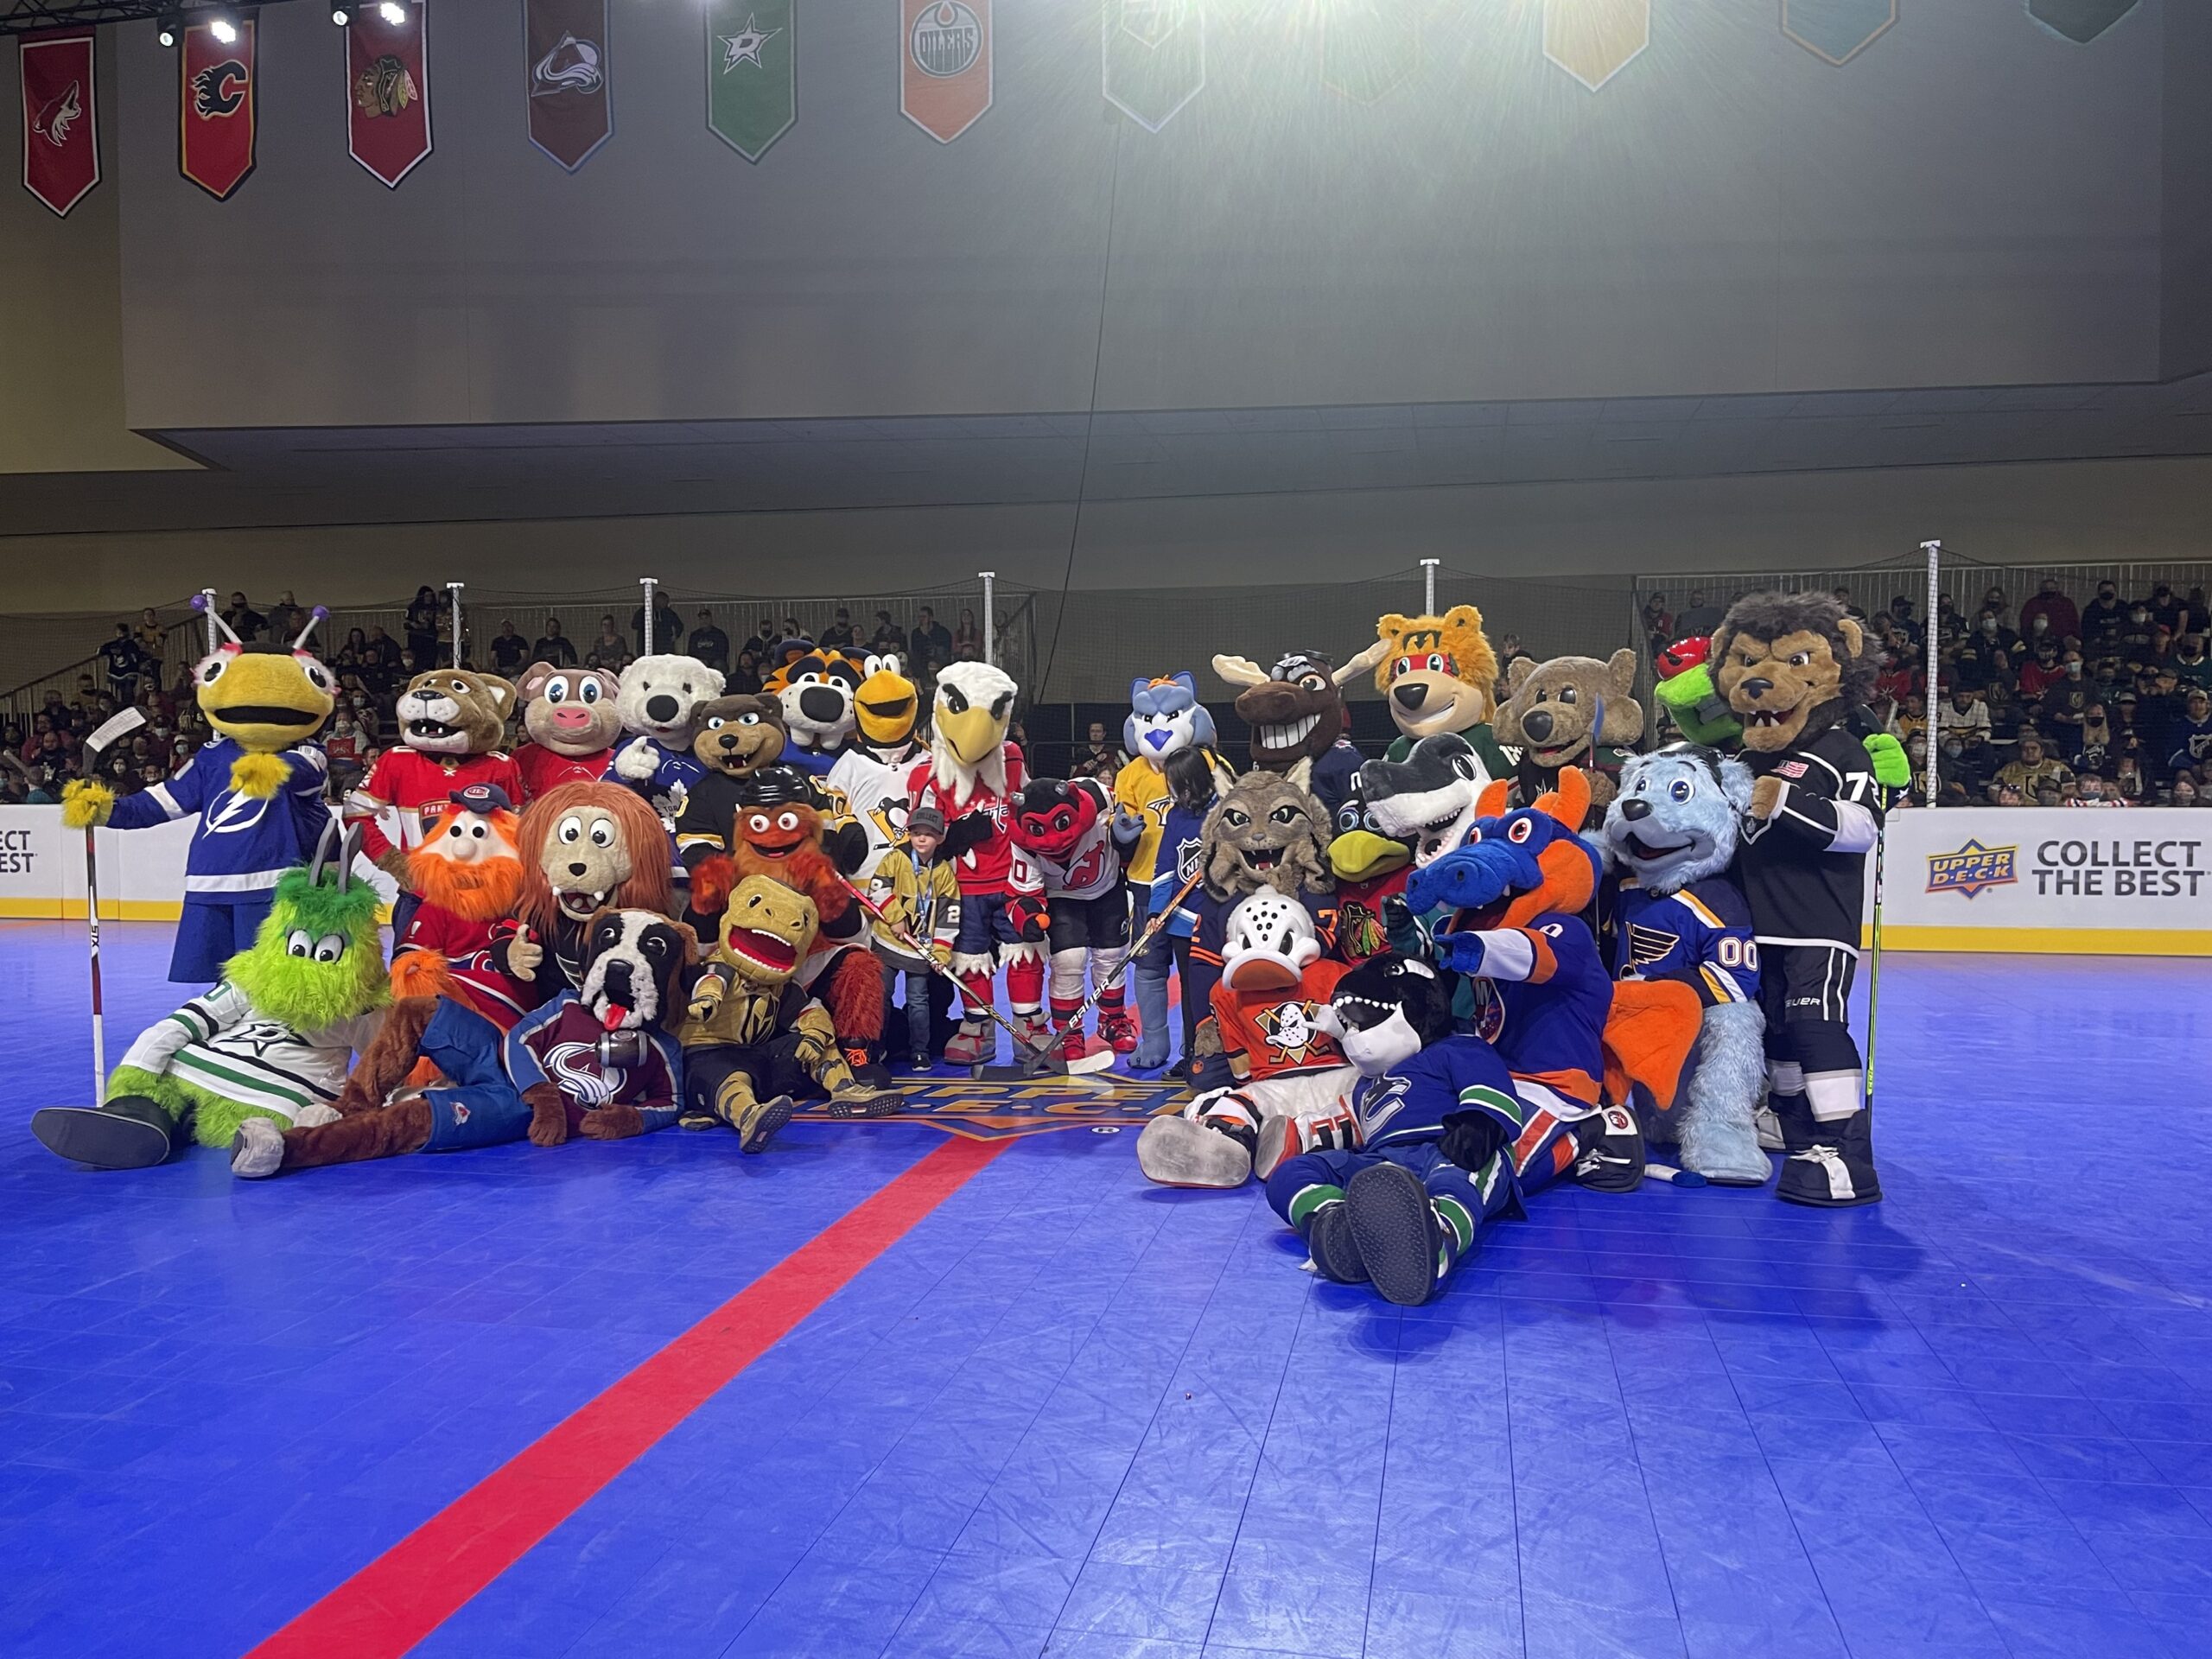 Edmonton Oilers mascot Hunter to compete at NHL All-Star weekend